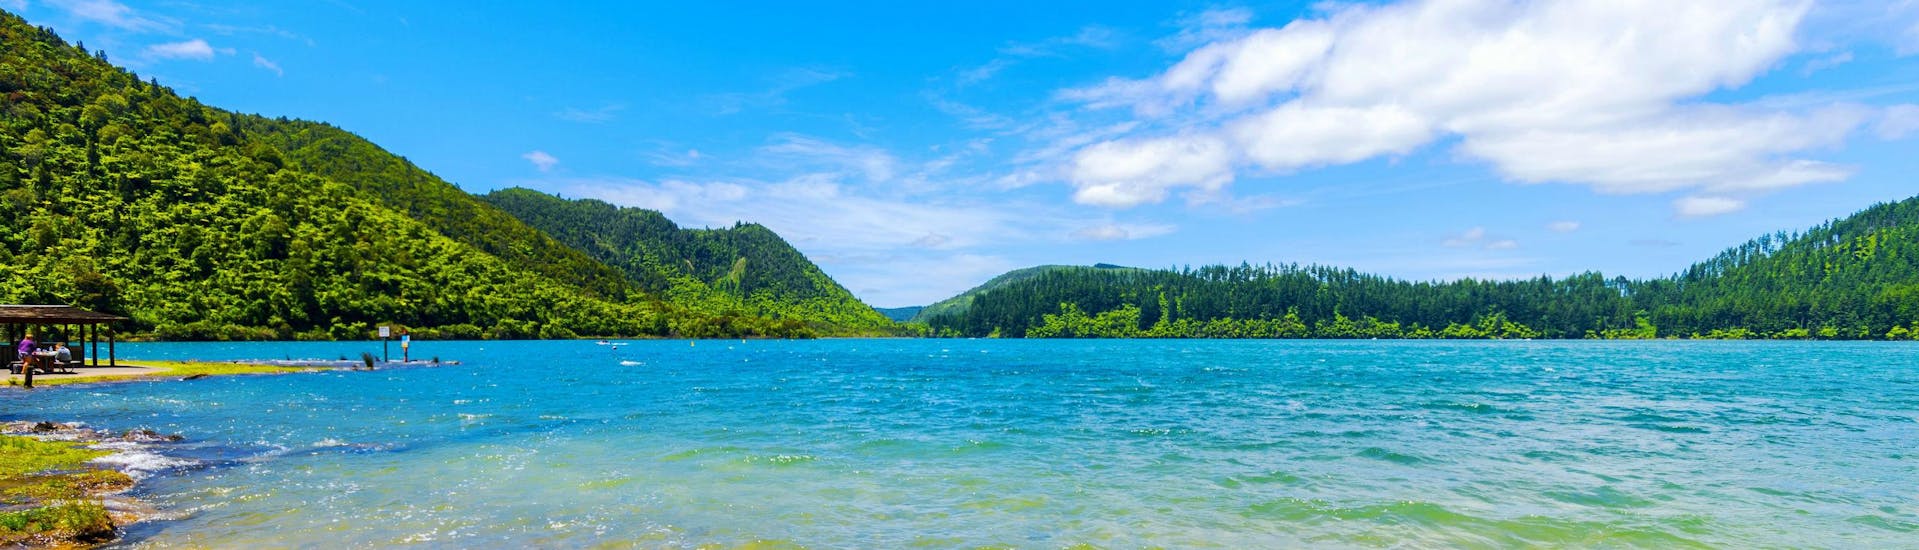 An image taken from the shores of Lake Tikitapu in the Rotorua region, a popular hotspot for kayaking in New Zealand.